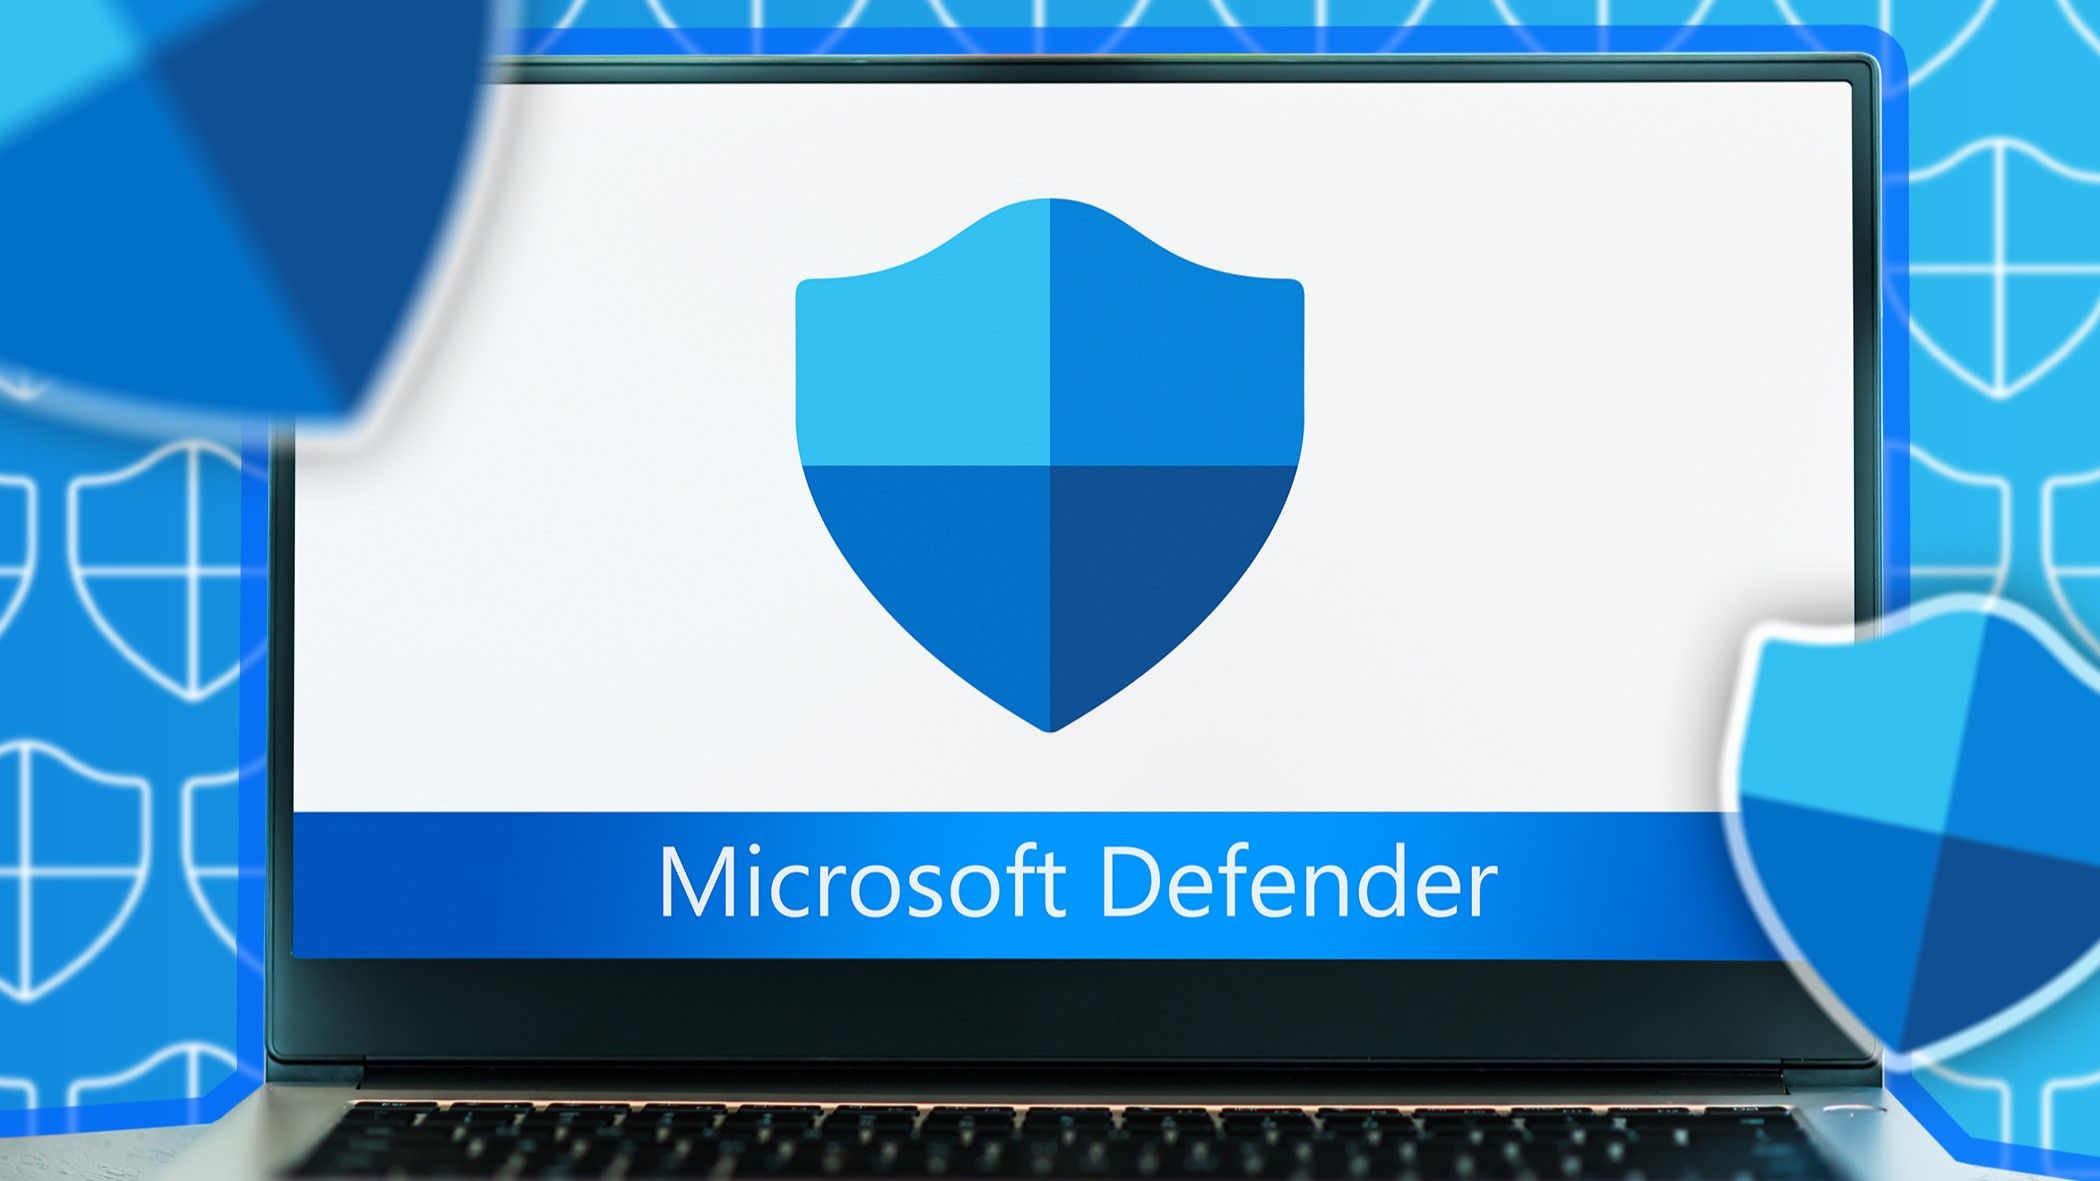 A laptop with Microsoft Defender icon on the screen.